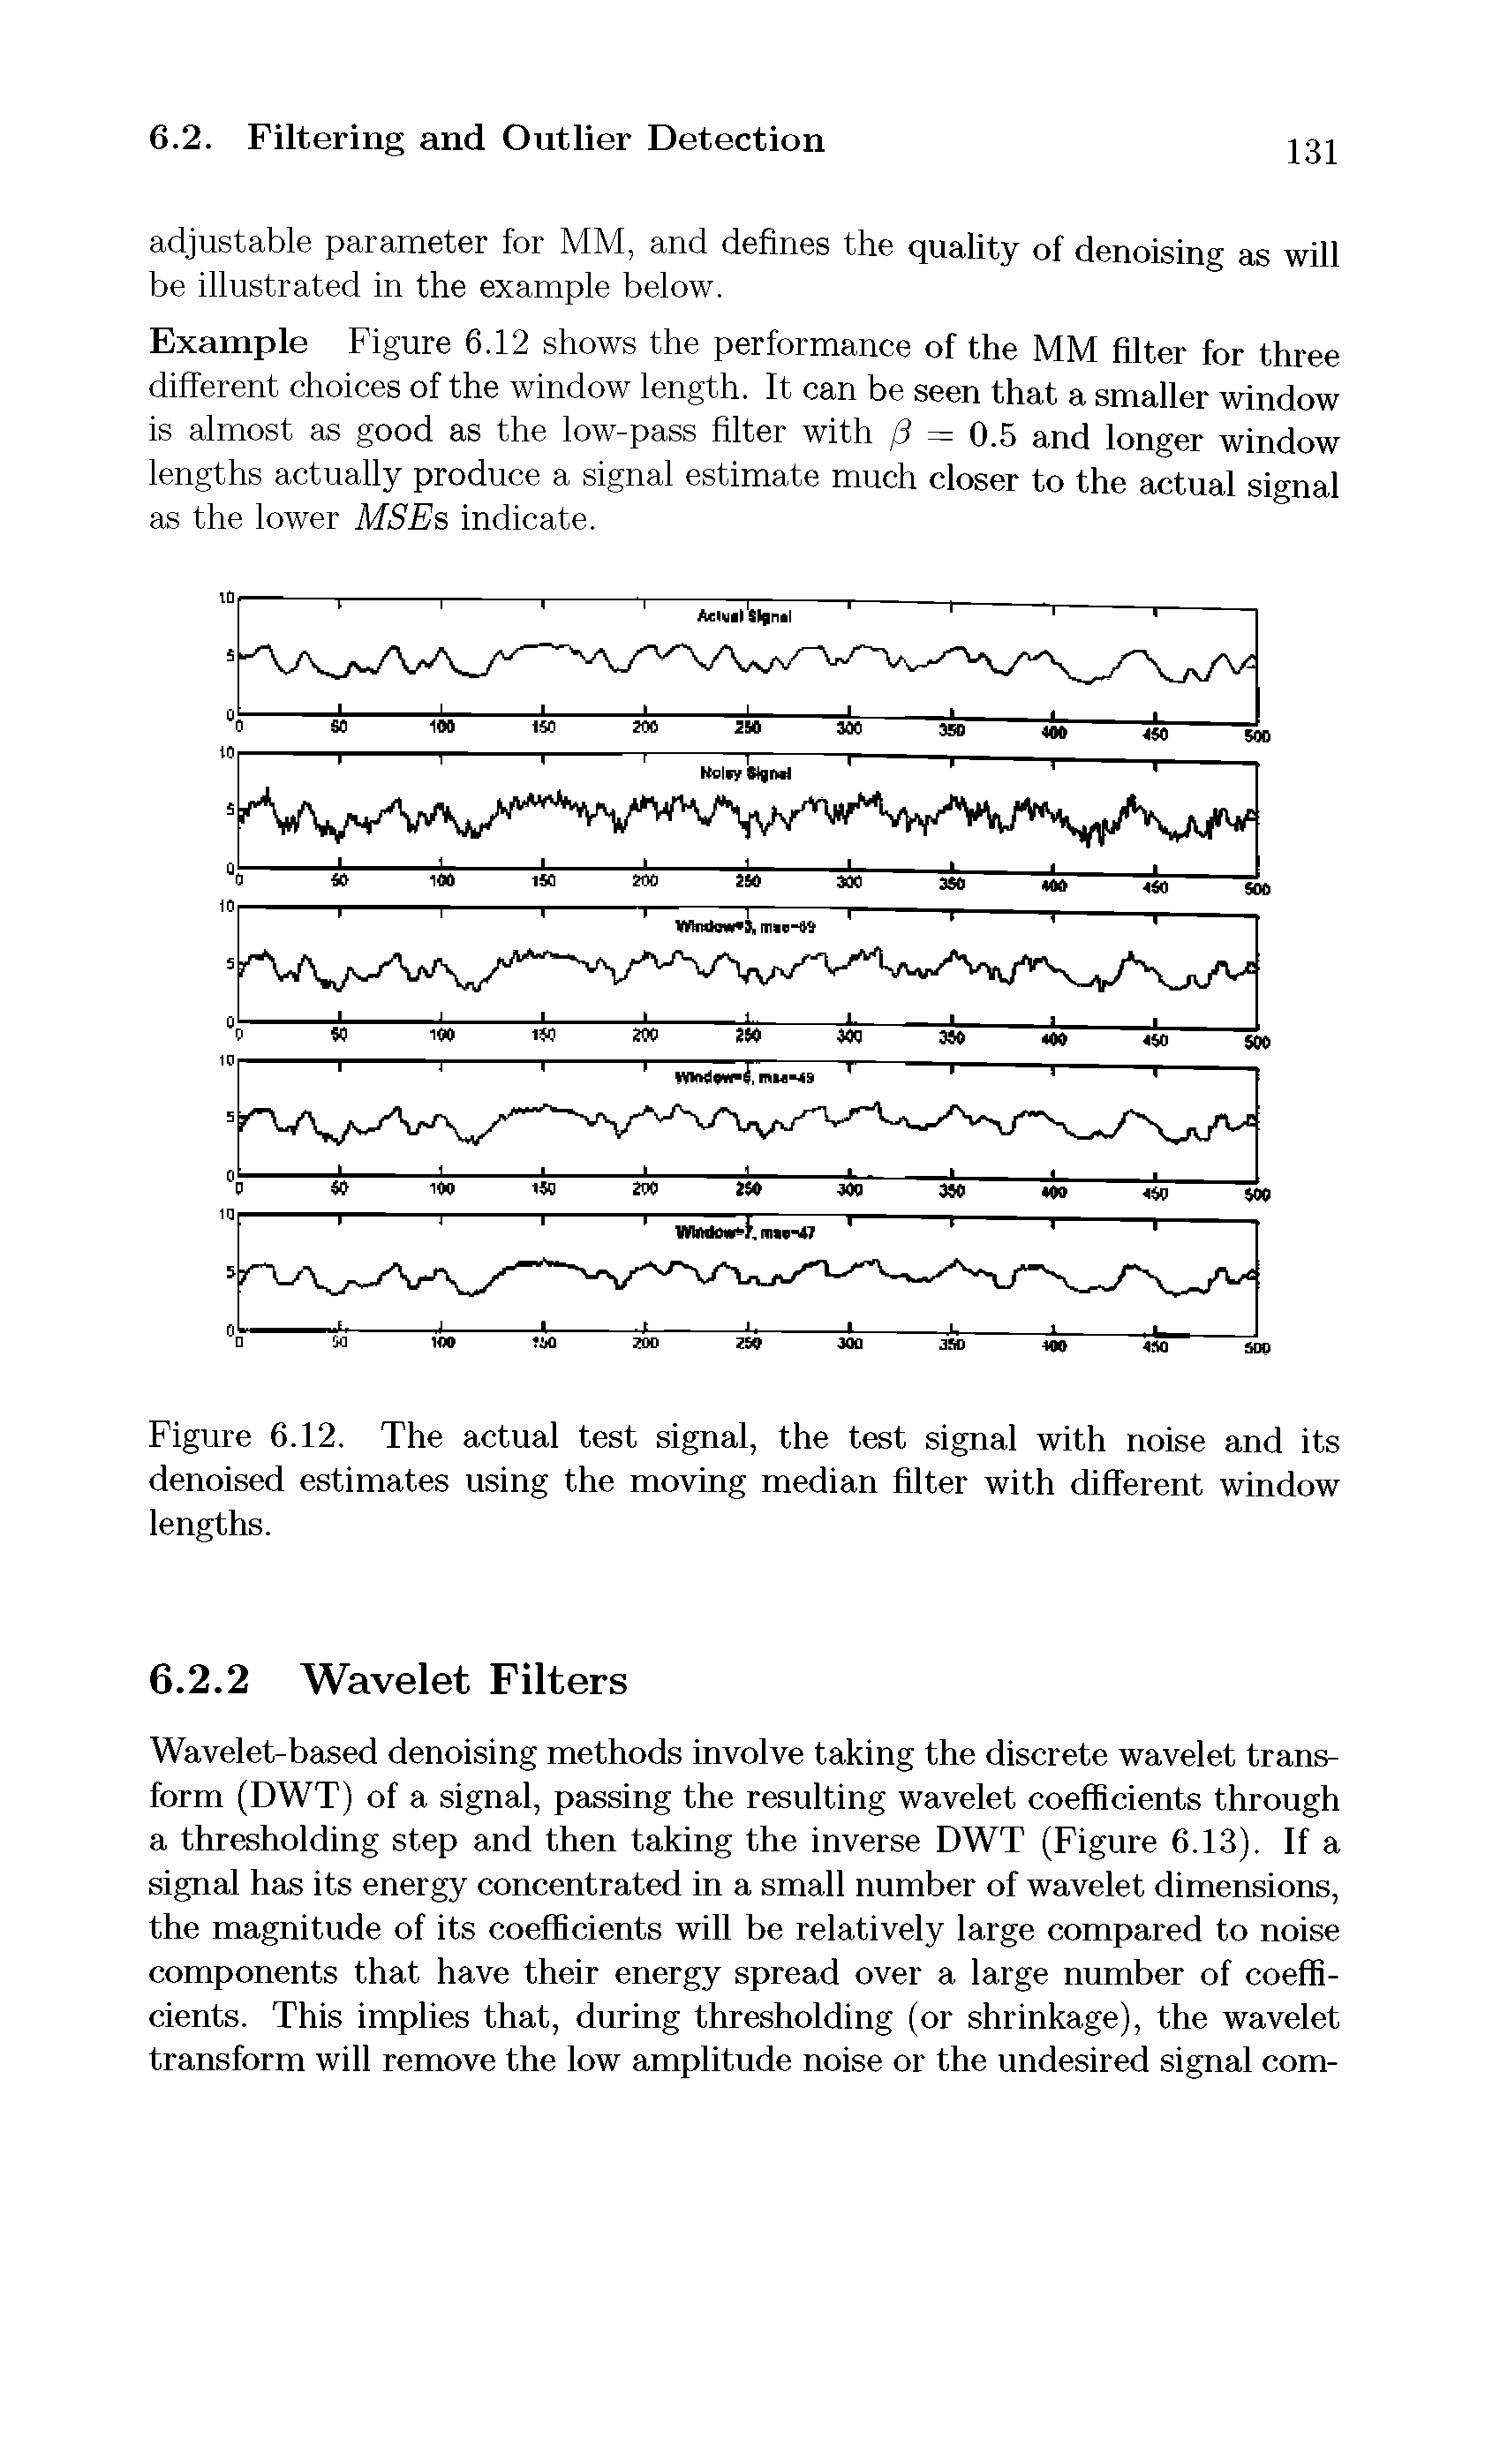 Figure 6.12. The actual test signal, the test signal with noise and its denoised estimates using the moving median filter with different window lengths.